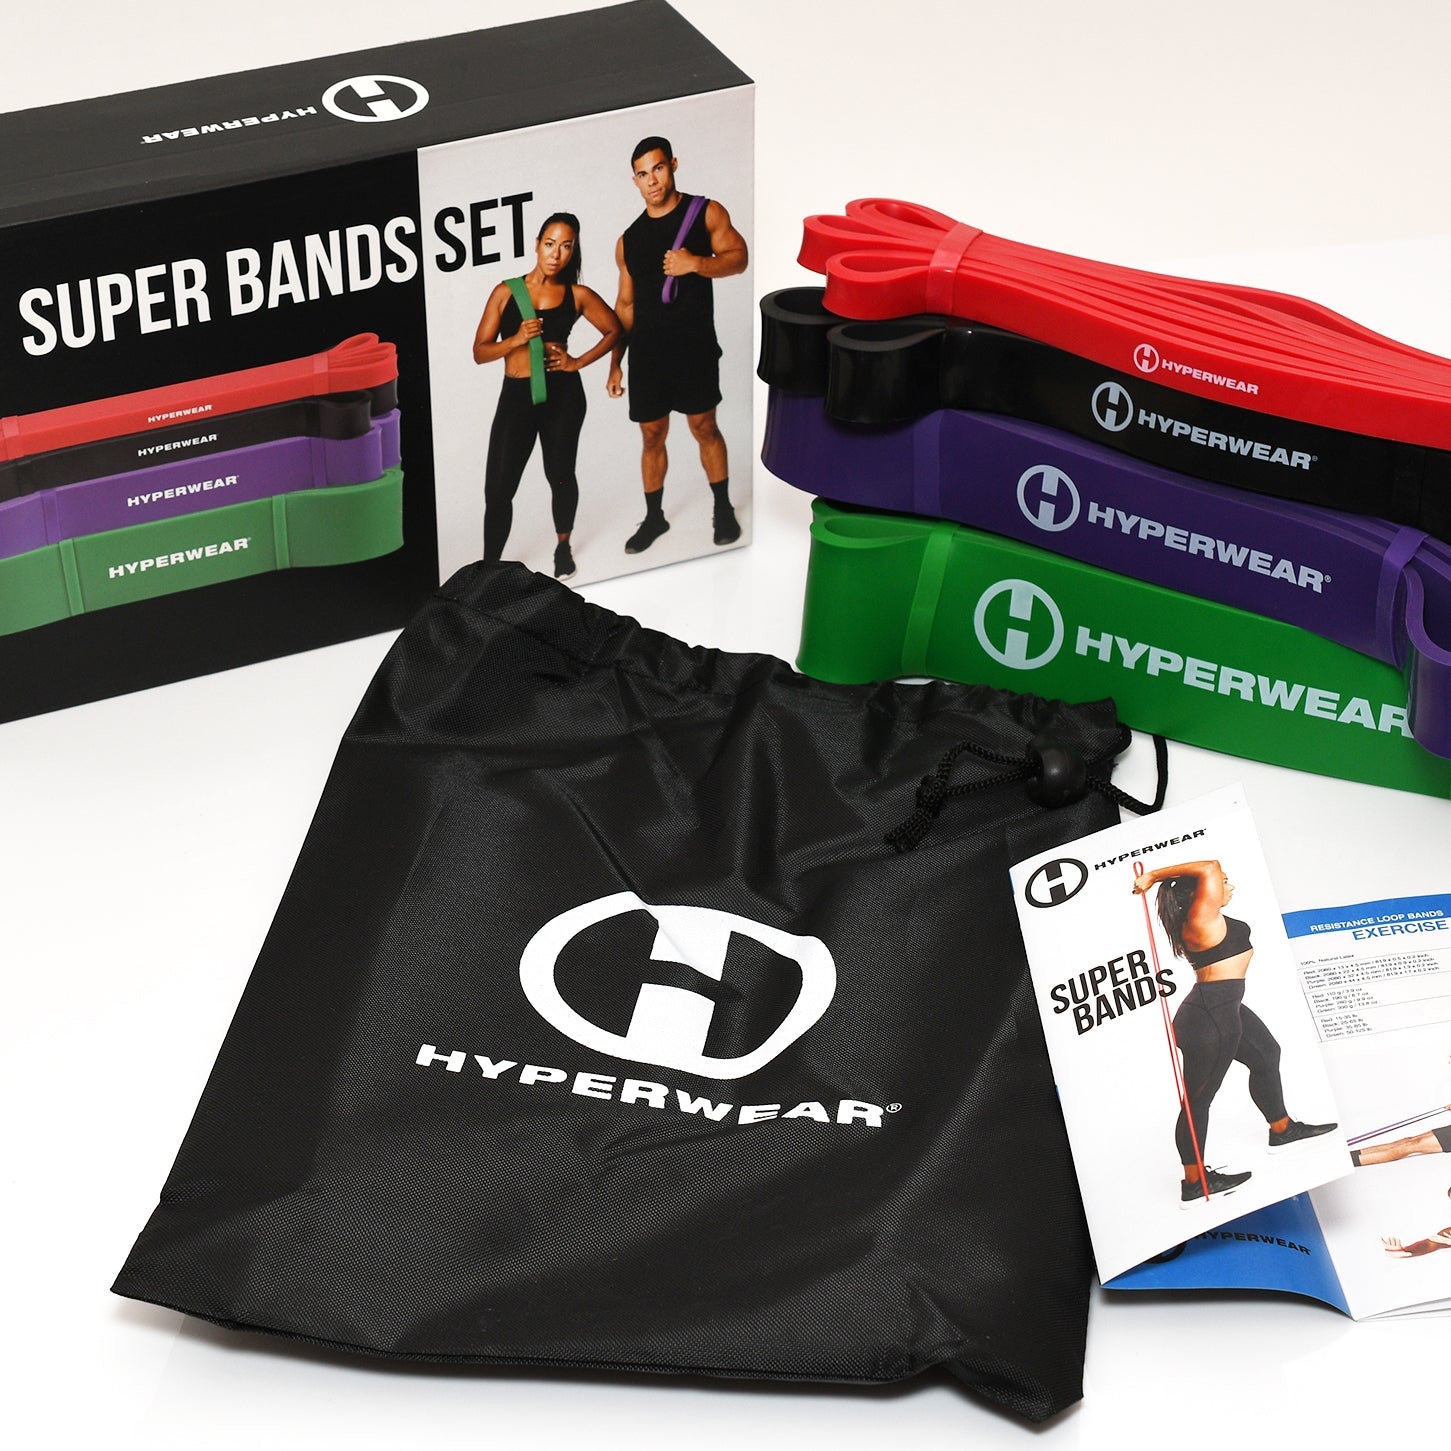 Product photo of a set of red, black, purple, green pull-up assist bands or super bands set including box, bag and exercise pamphlet